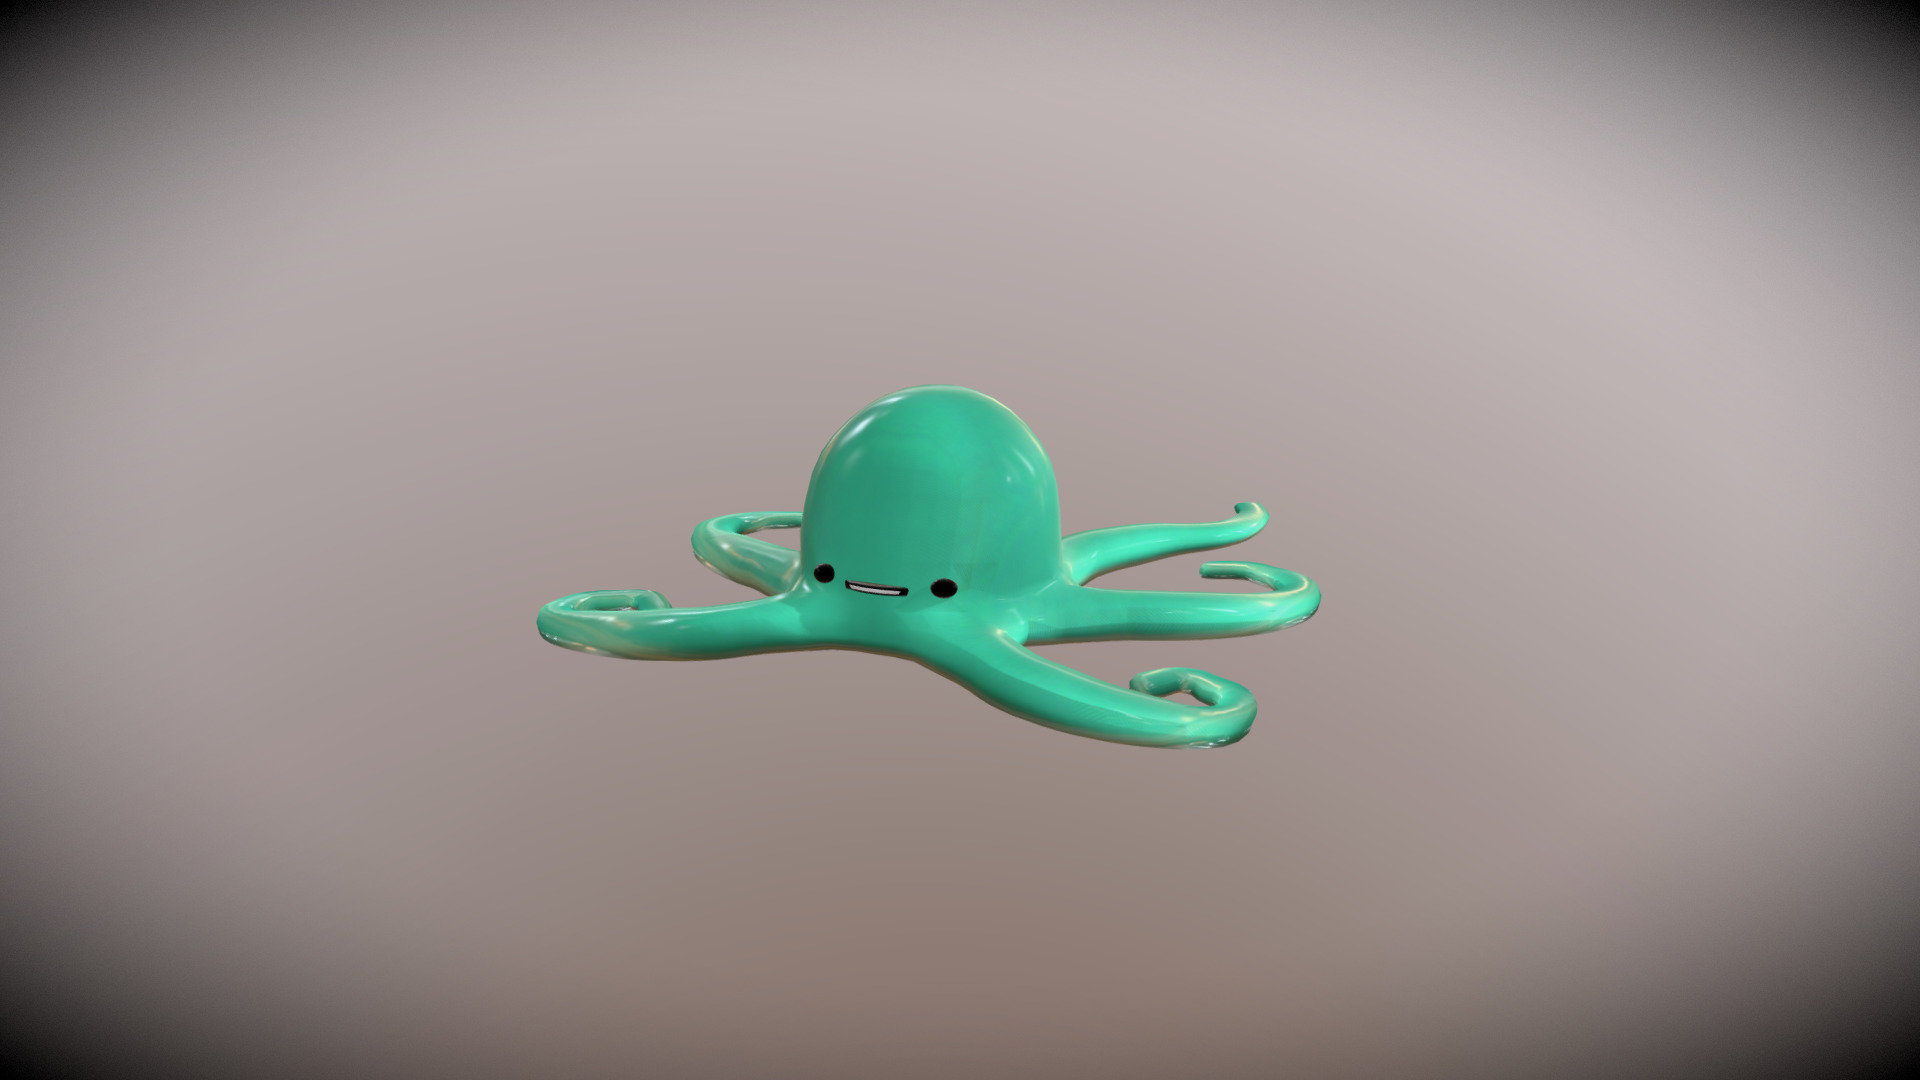 Octopus made during my internship at Koski game https://www.koskigame.com/ 
https://www.artstation.com/artwork/0kw48

for more details of this Octopus process
https://youtu.be/qunQ22GZtRQ

Rigging and Animation in Maya - Octopus Koski - 3D model by Aurielle Philippart (@phiauri) 3d model